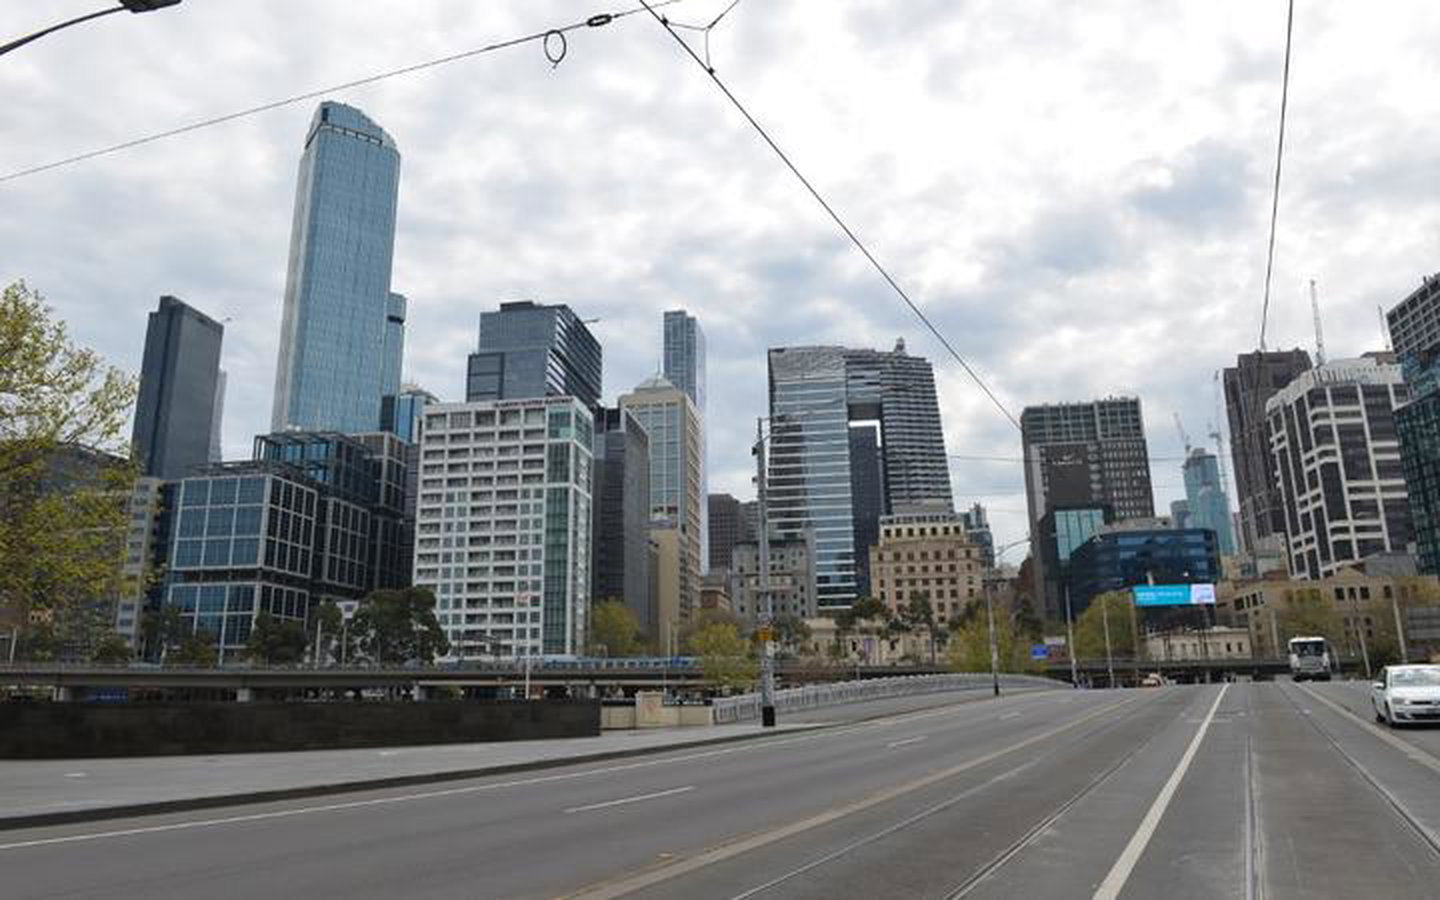 MELBOURNE, AUSTRALIA - SEPTEMBER 18: A deserted view from Melbourne city on September 18, 2020 in Melbourne, Australia. Streets, shopping malls, squares, parks and train stations in the city remain empty due to the Stage 4 restrictions and curfew from 9 p.m. to 5 a.m. 